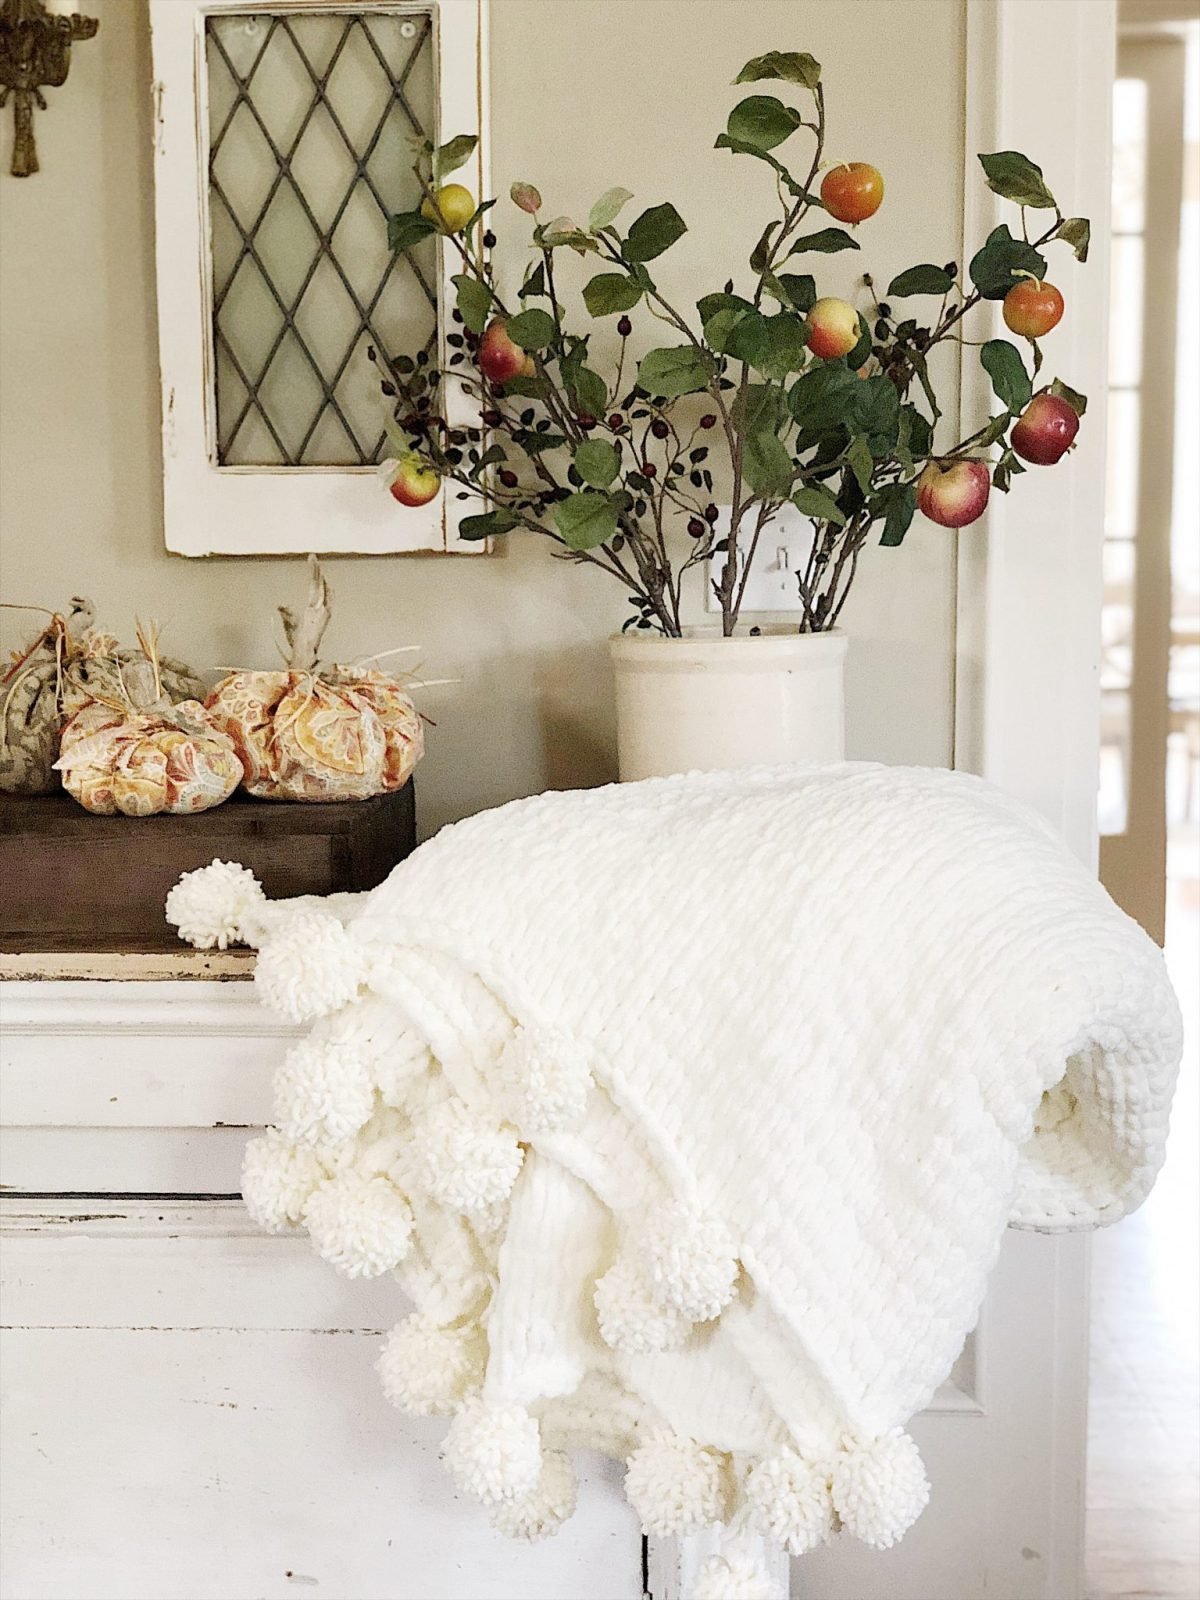 Decorating for fall with pumpkins, florals and chunky blanket.